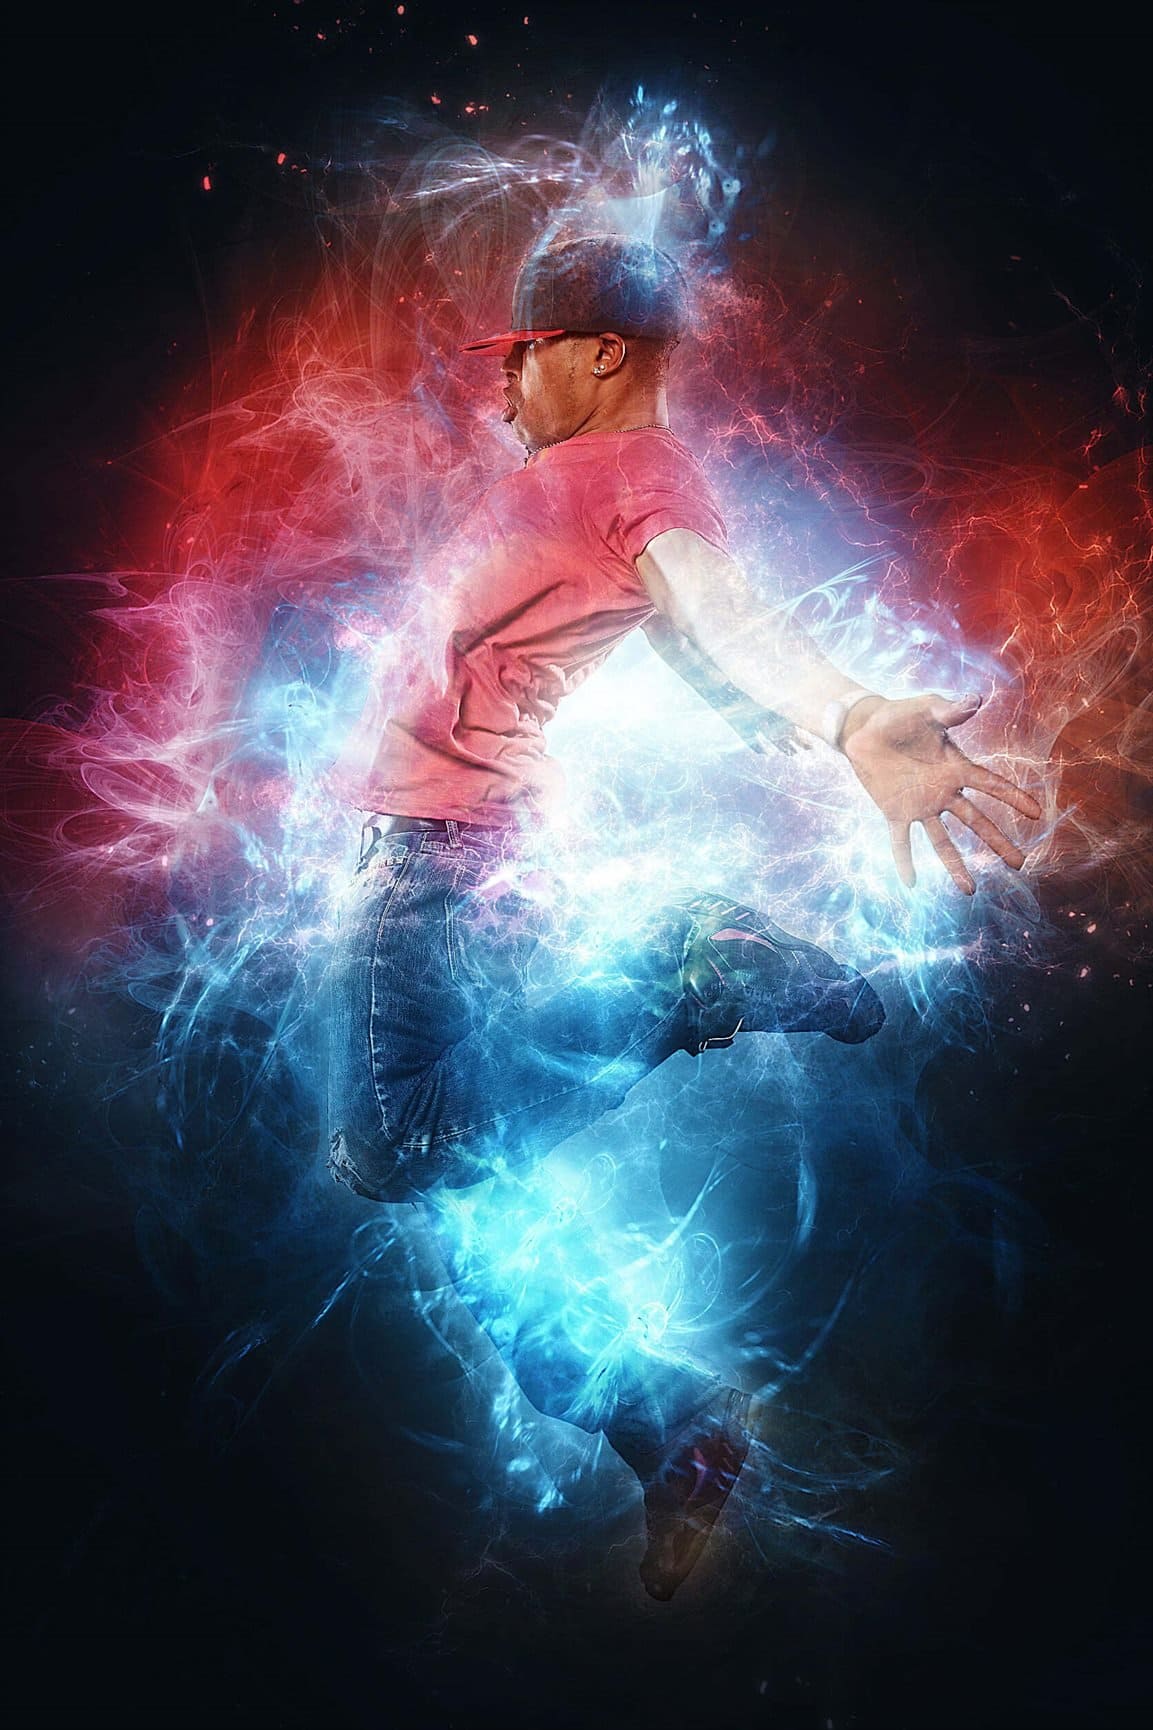 Dancer on a black and electric background.